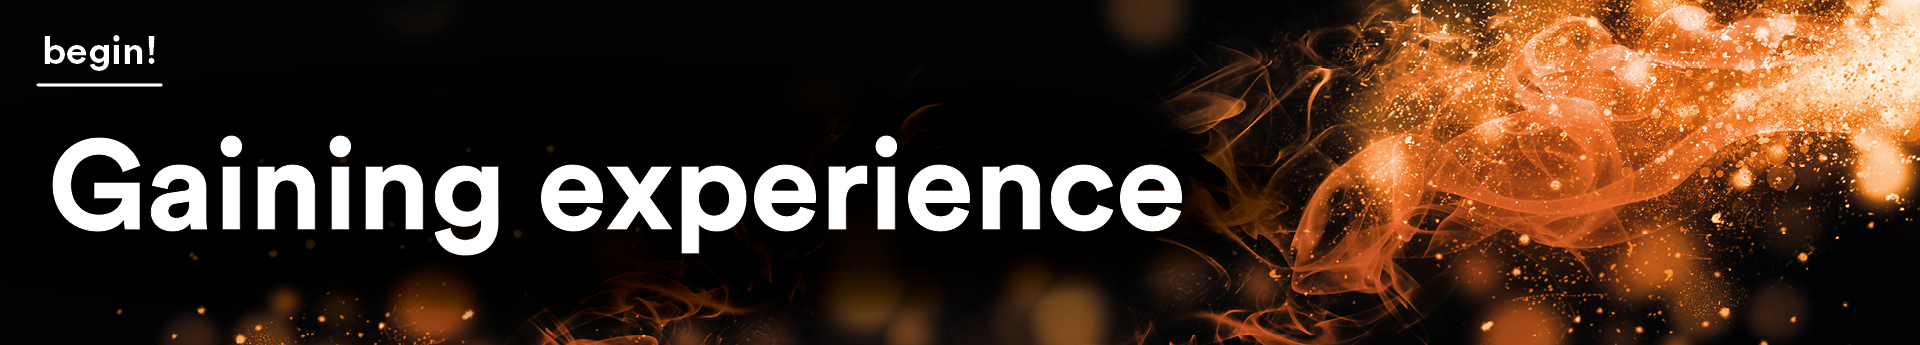 Gaining experience index banner